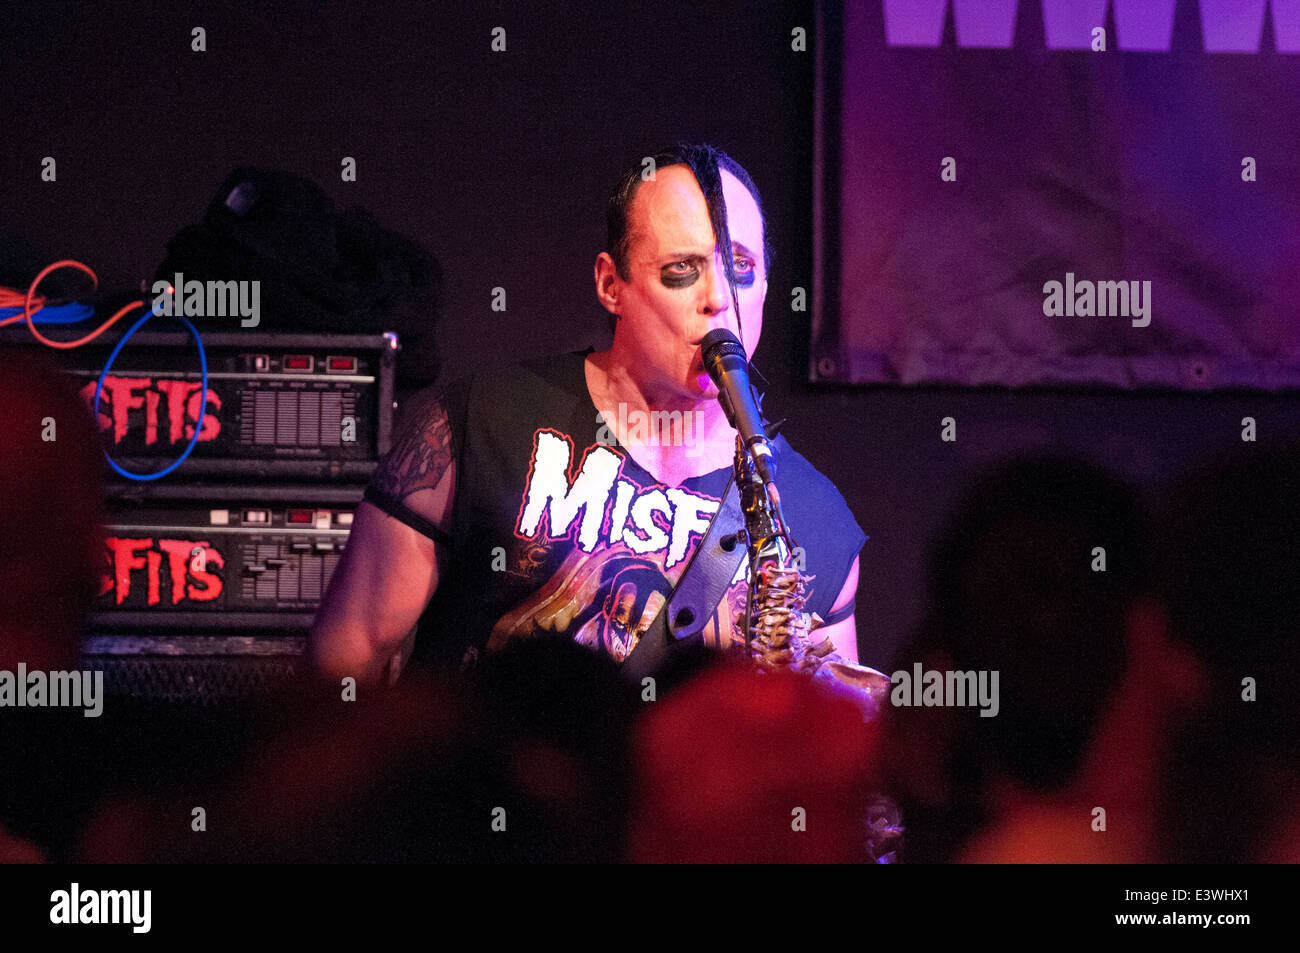 Singer Jerry Only (Gerrard Caiafa) performing with The Misfits.  EDITORIAL USE ONLY Stock Photo